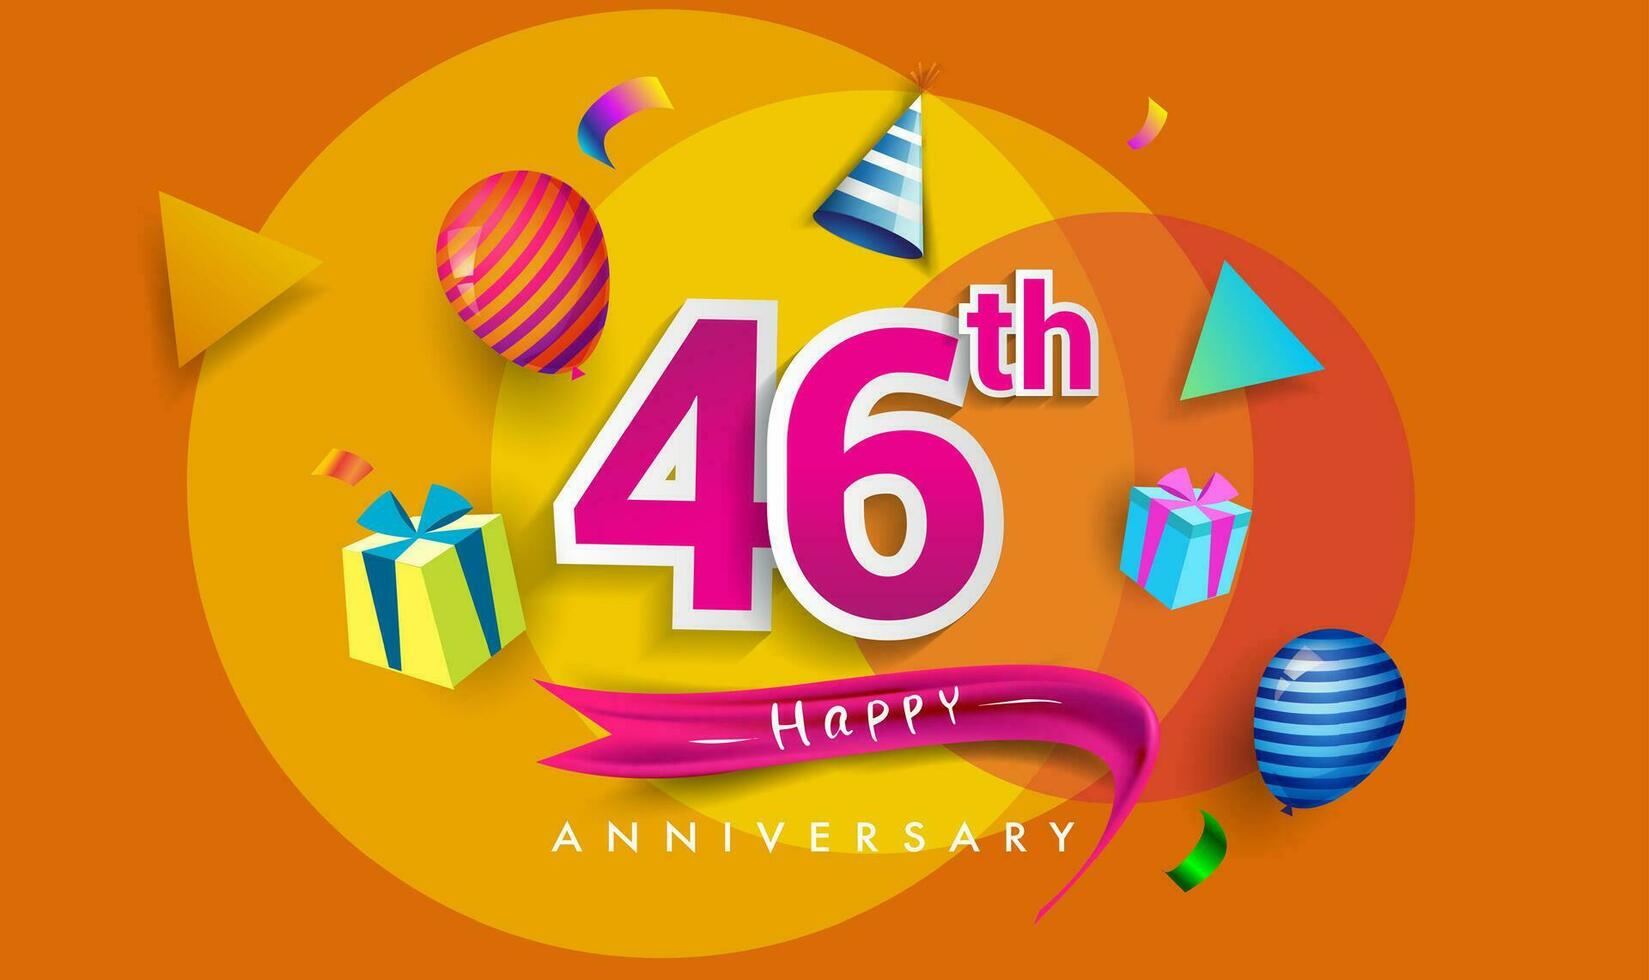 46th Years Anniversary Celebration Design, with gift box and balloons, ribbon, Colorful Vector template elements for your birthday celebrating party.